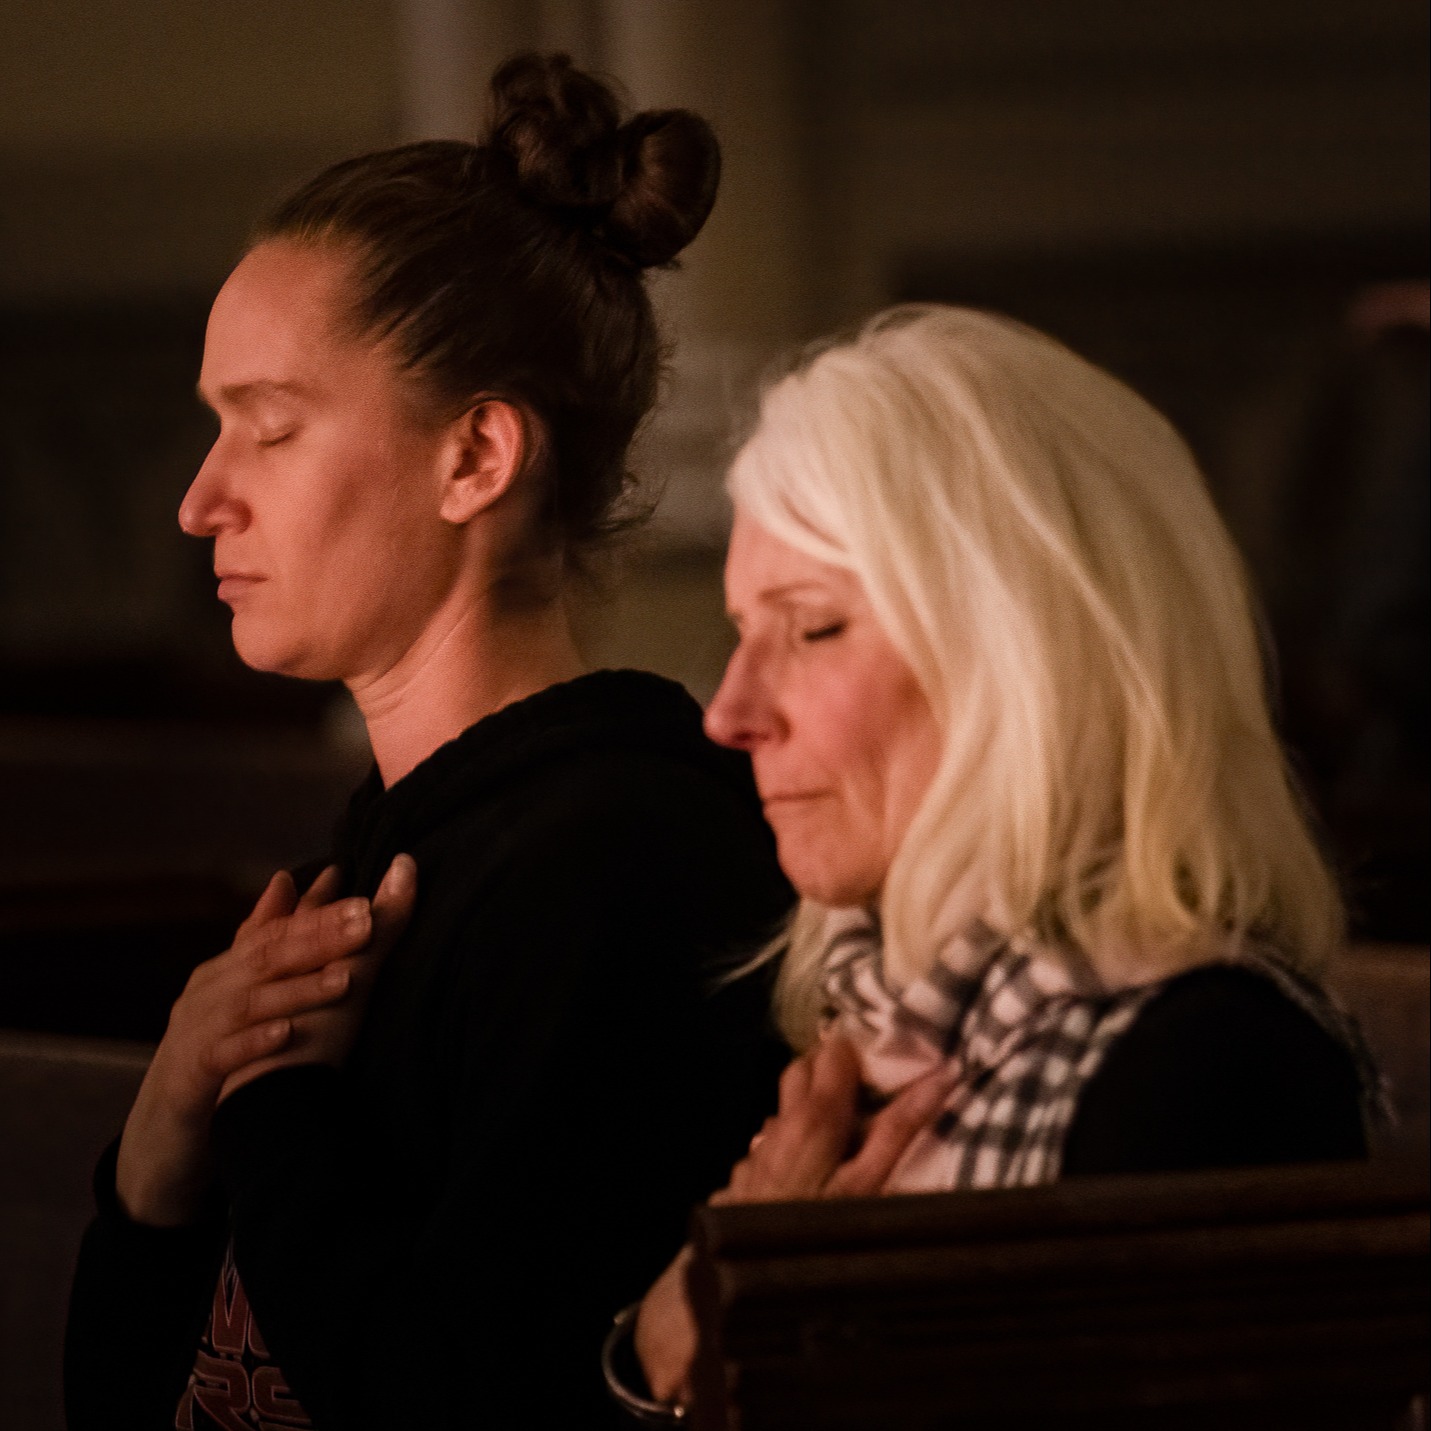 Two women silently praying with eyes closed